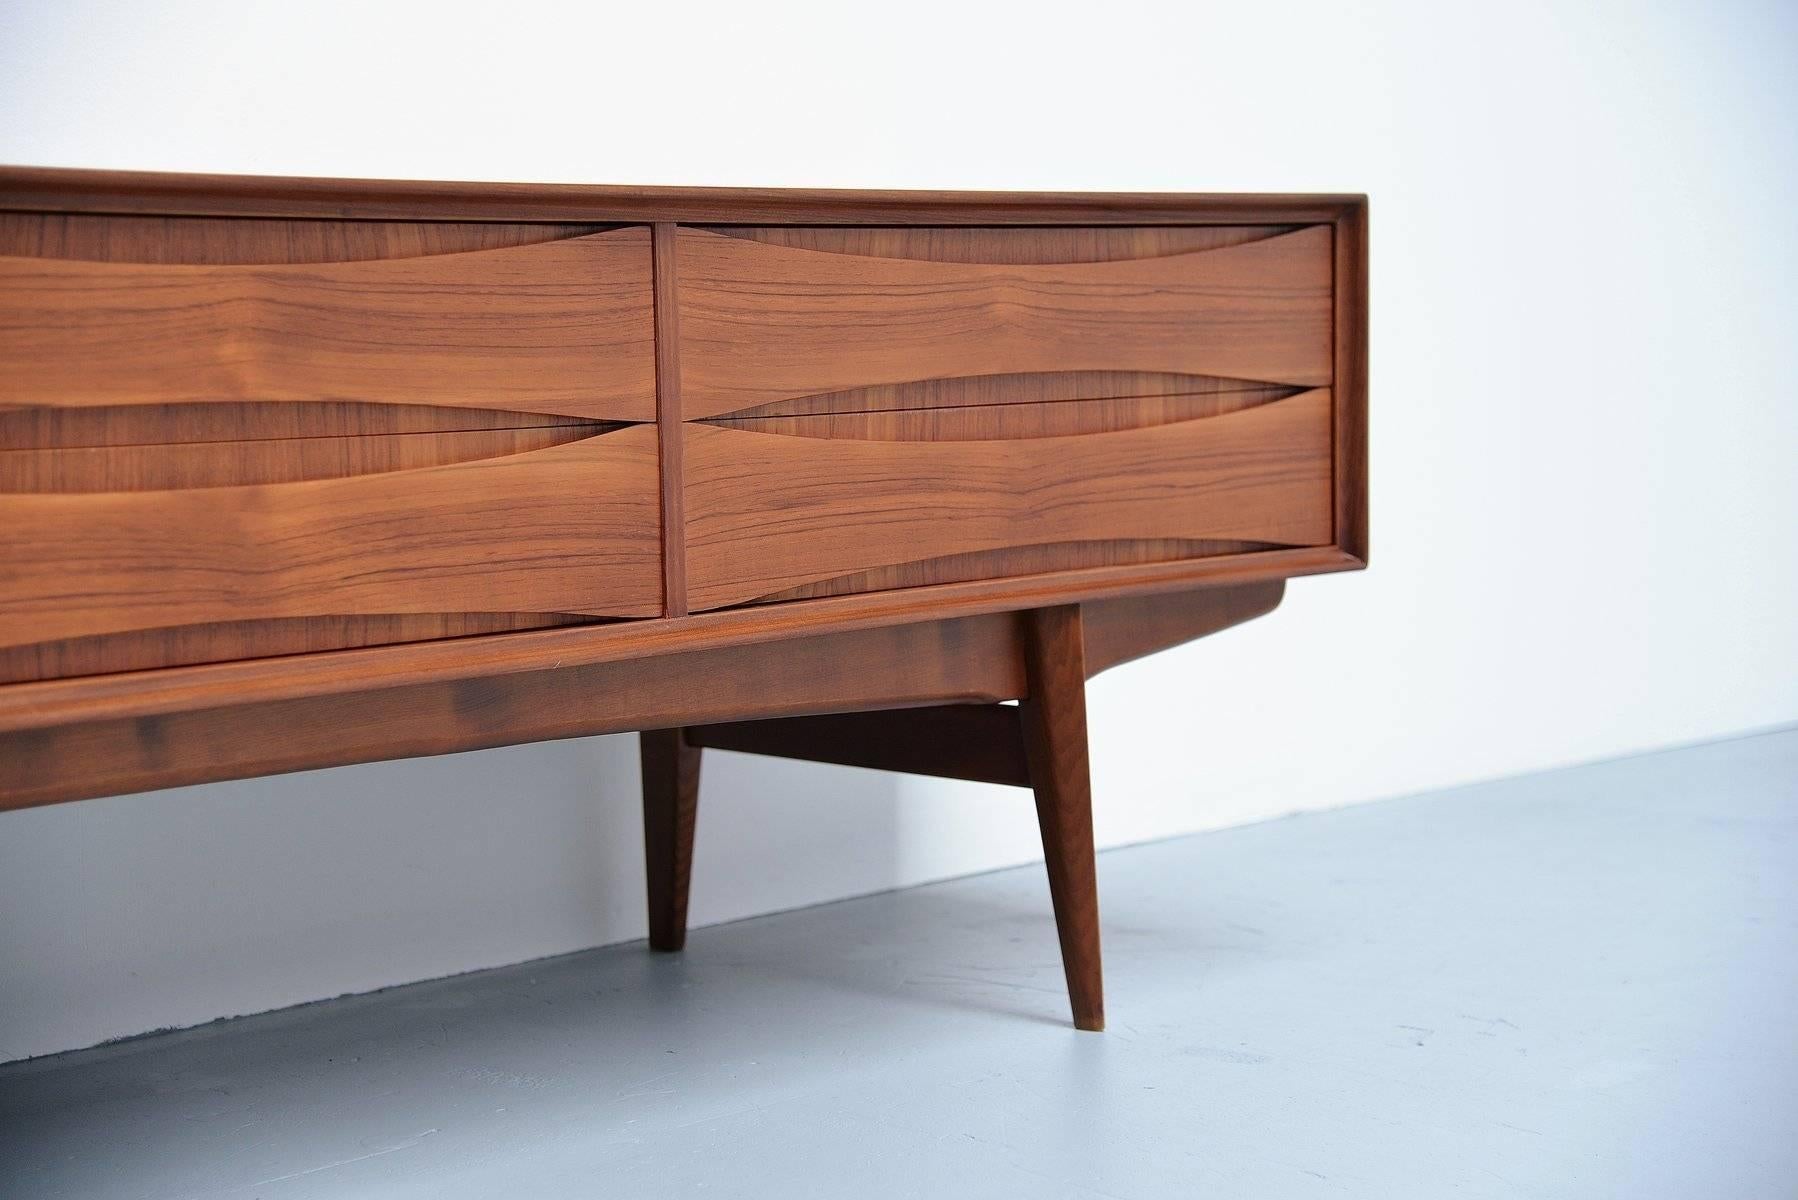 Very nice and quality low sideboard designed by Oswald Vermaercke for V-Form, Belgium, 1959. This amazing credenza has a very nice and warm teak color and is fully refinished into perfect condition. The designs by Oswald Vermaercke are visibly